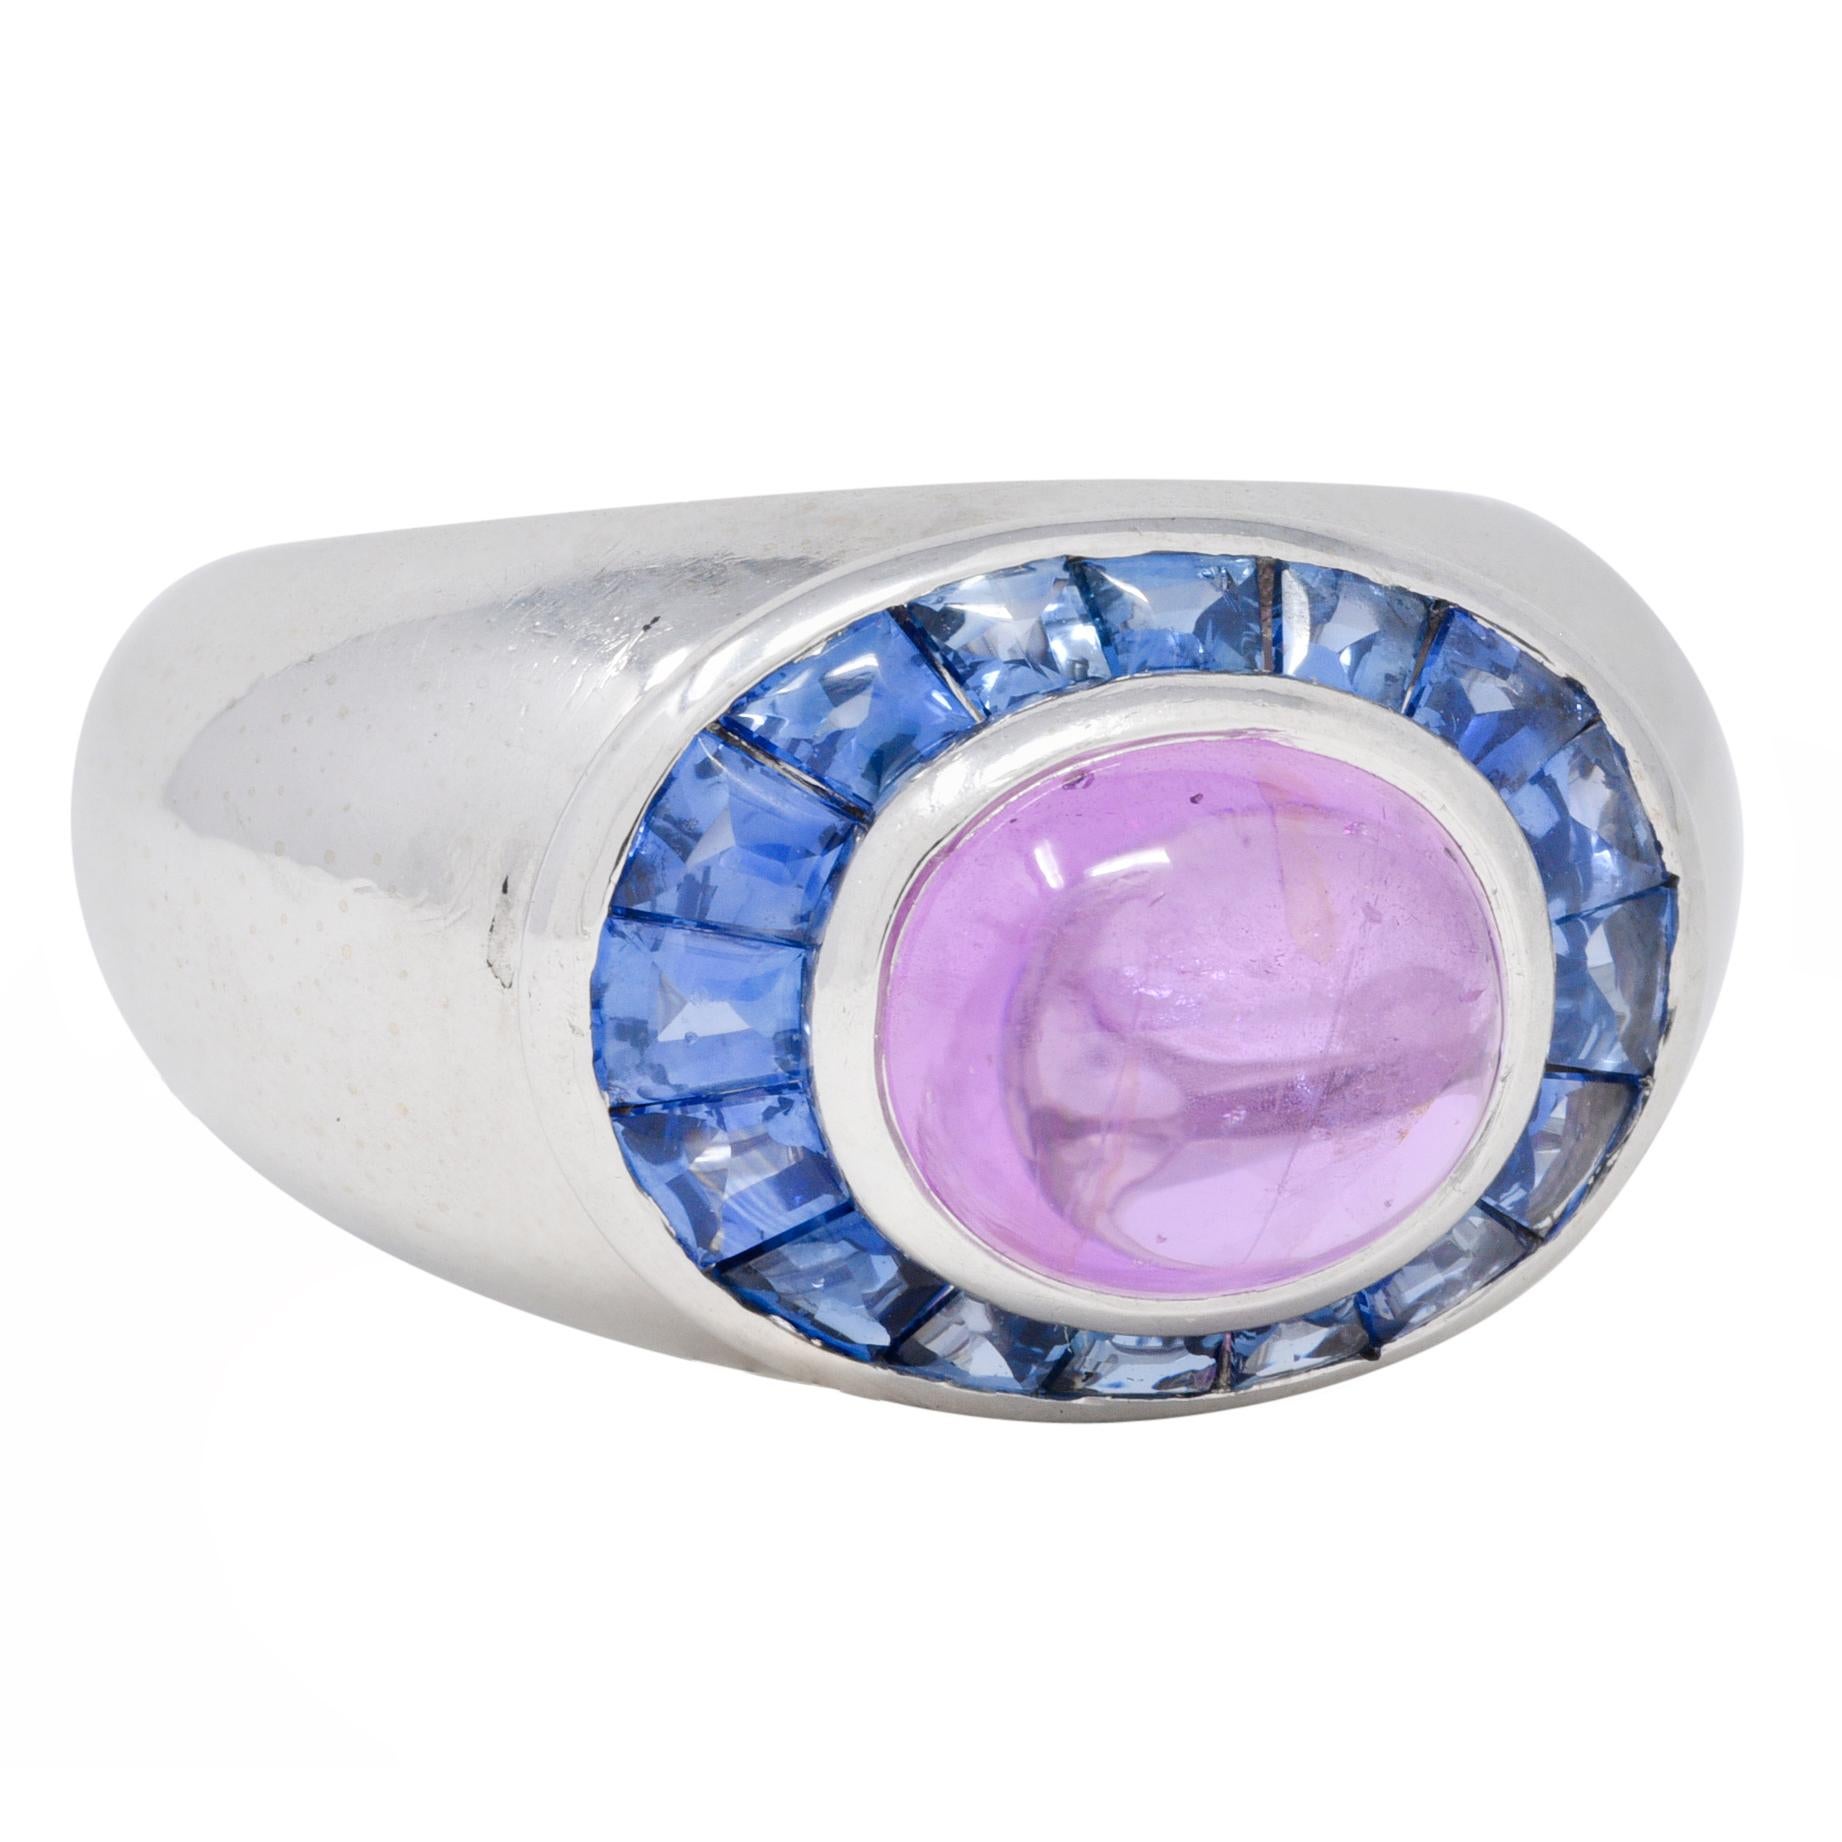 Centering an oval-shaped sapphire cabochon weighing approximately 3.82 carats total 
Transparent medium pinkish-purple in color and bezel set east to west
With a halo surround of calibré cut sapphires
Weighing approximately 1.26 carats total